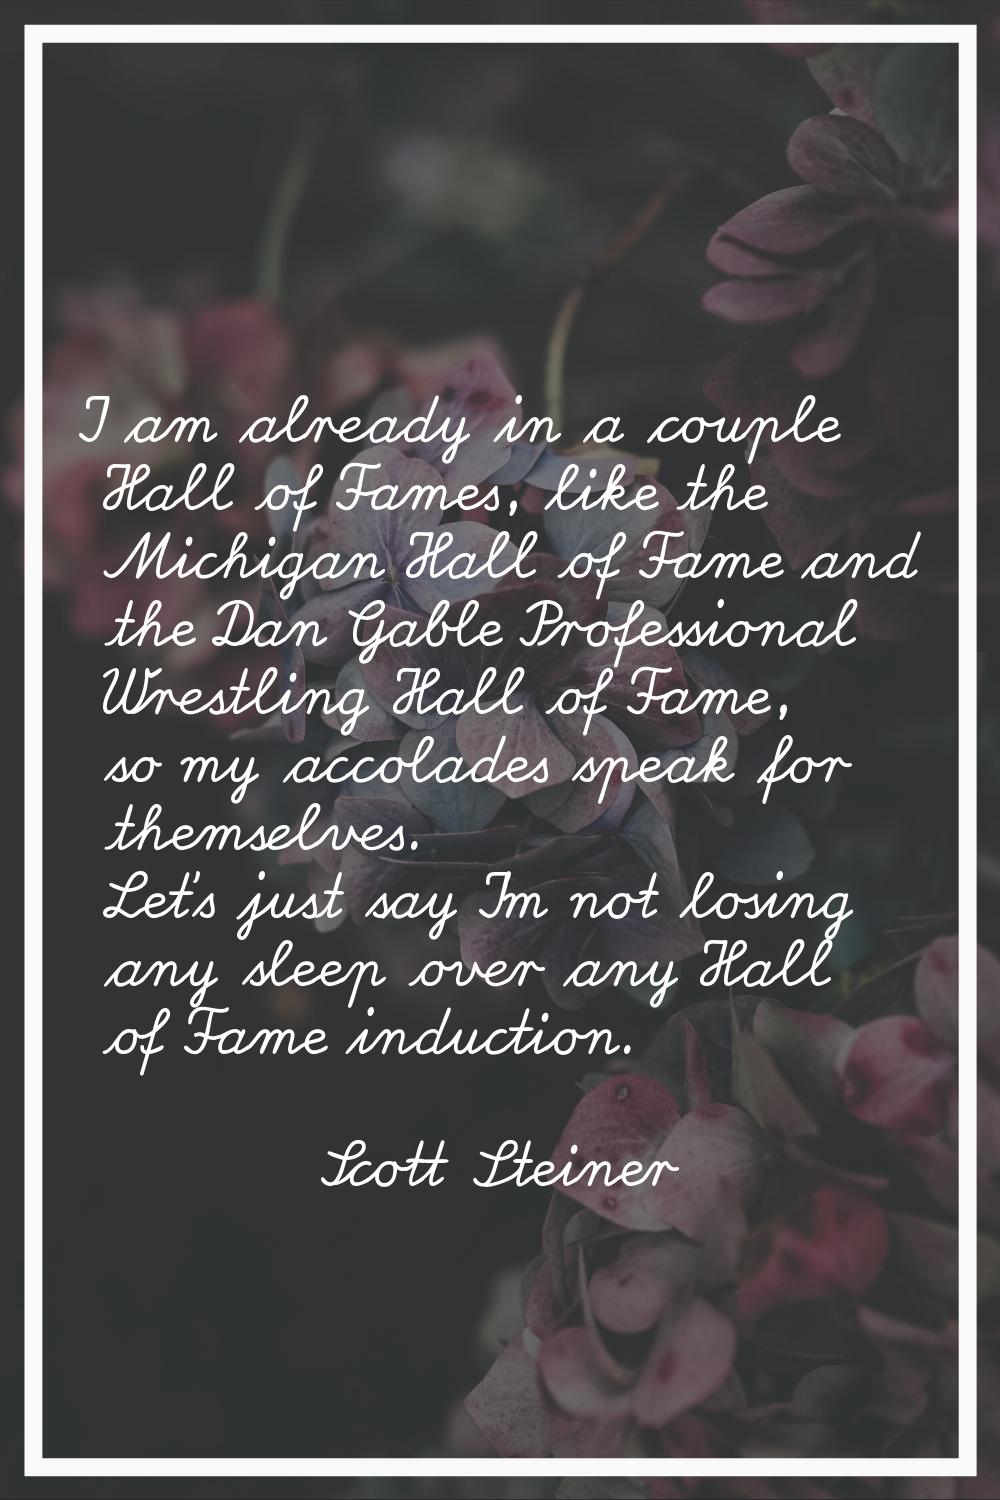 I am already in a couple Hall of Fames, like the Michigan Hall of Fame and the Dan Gable Profession